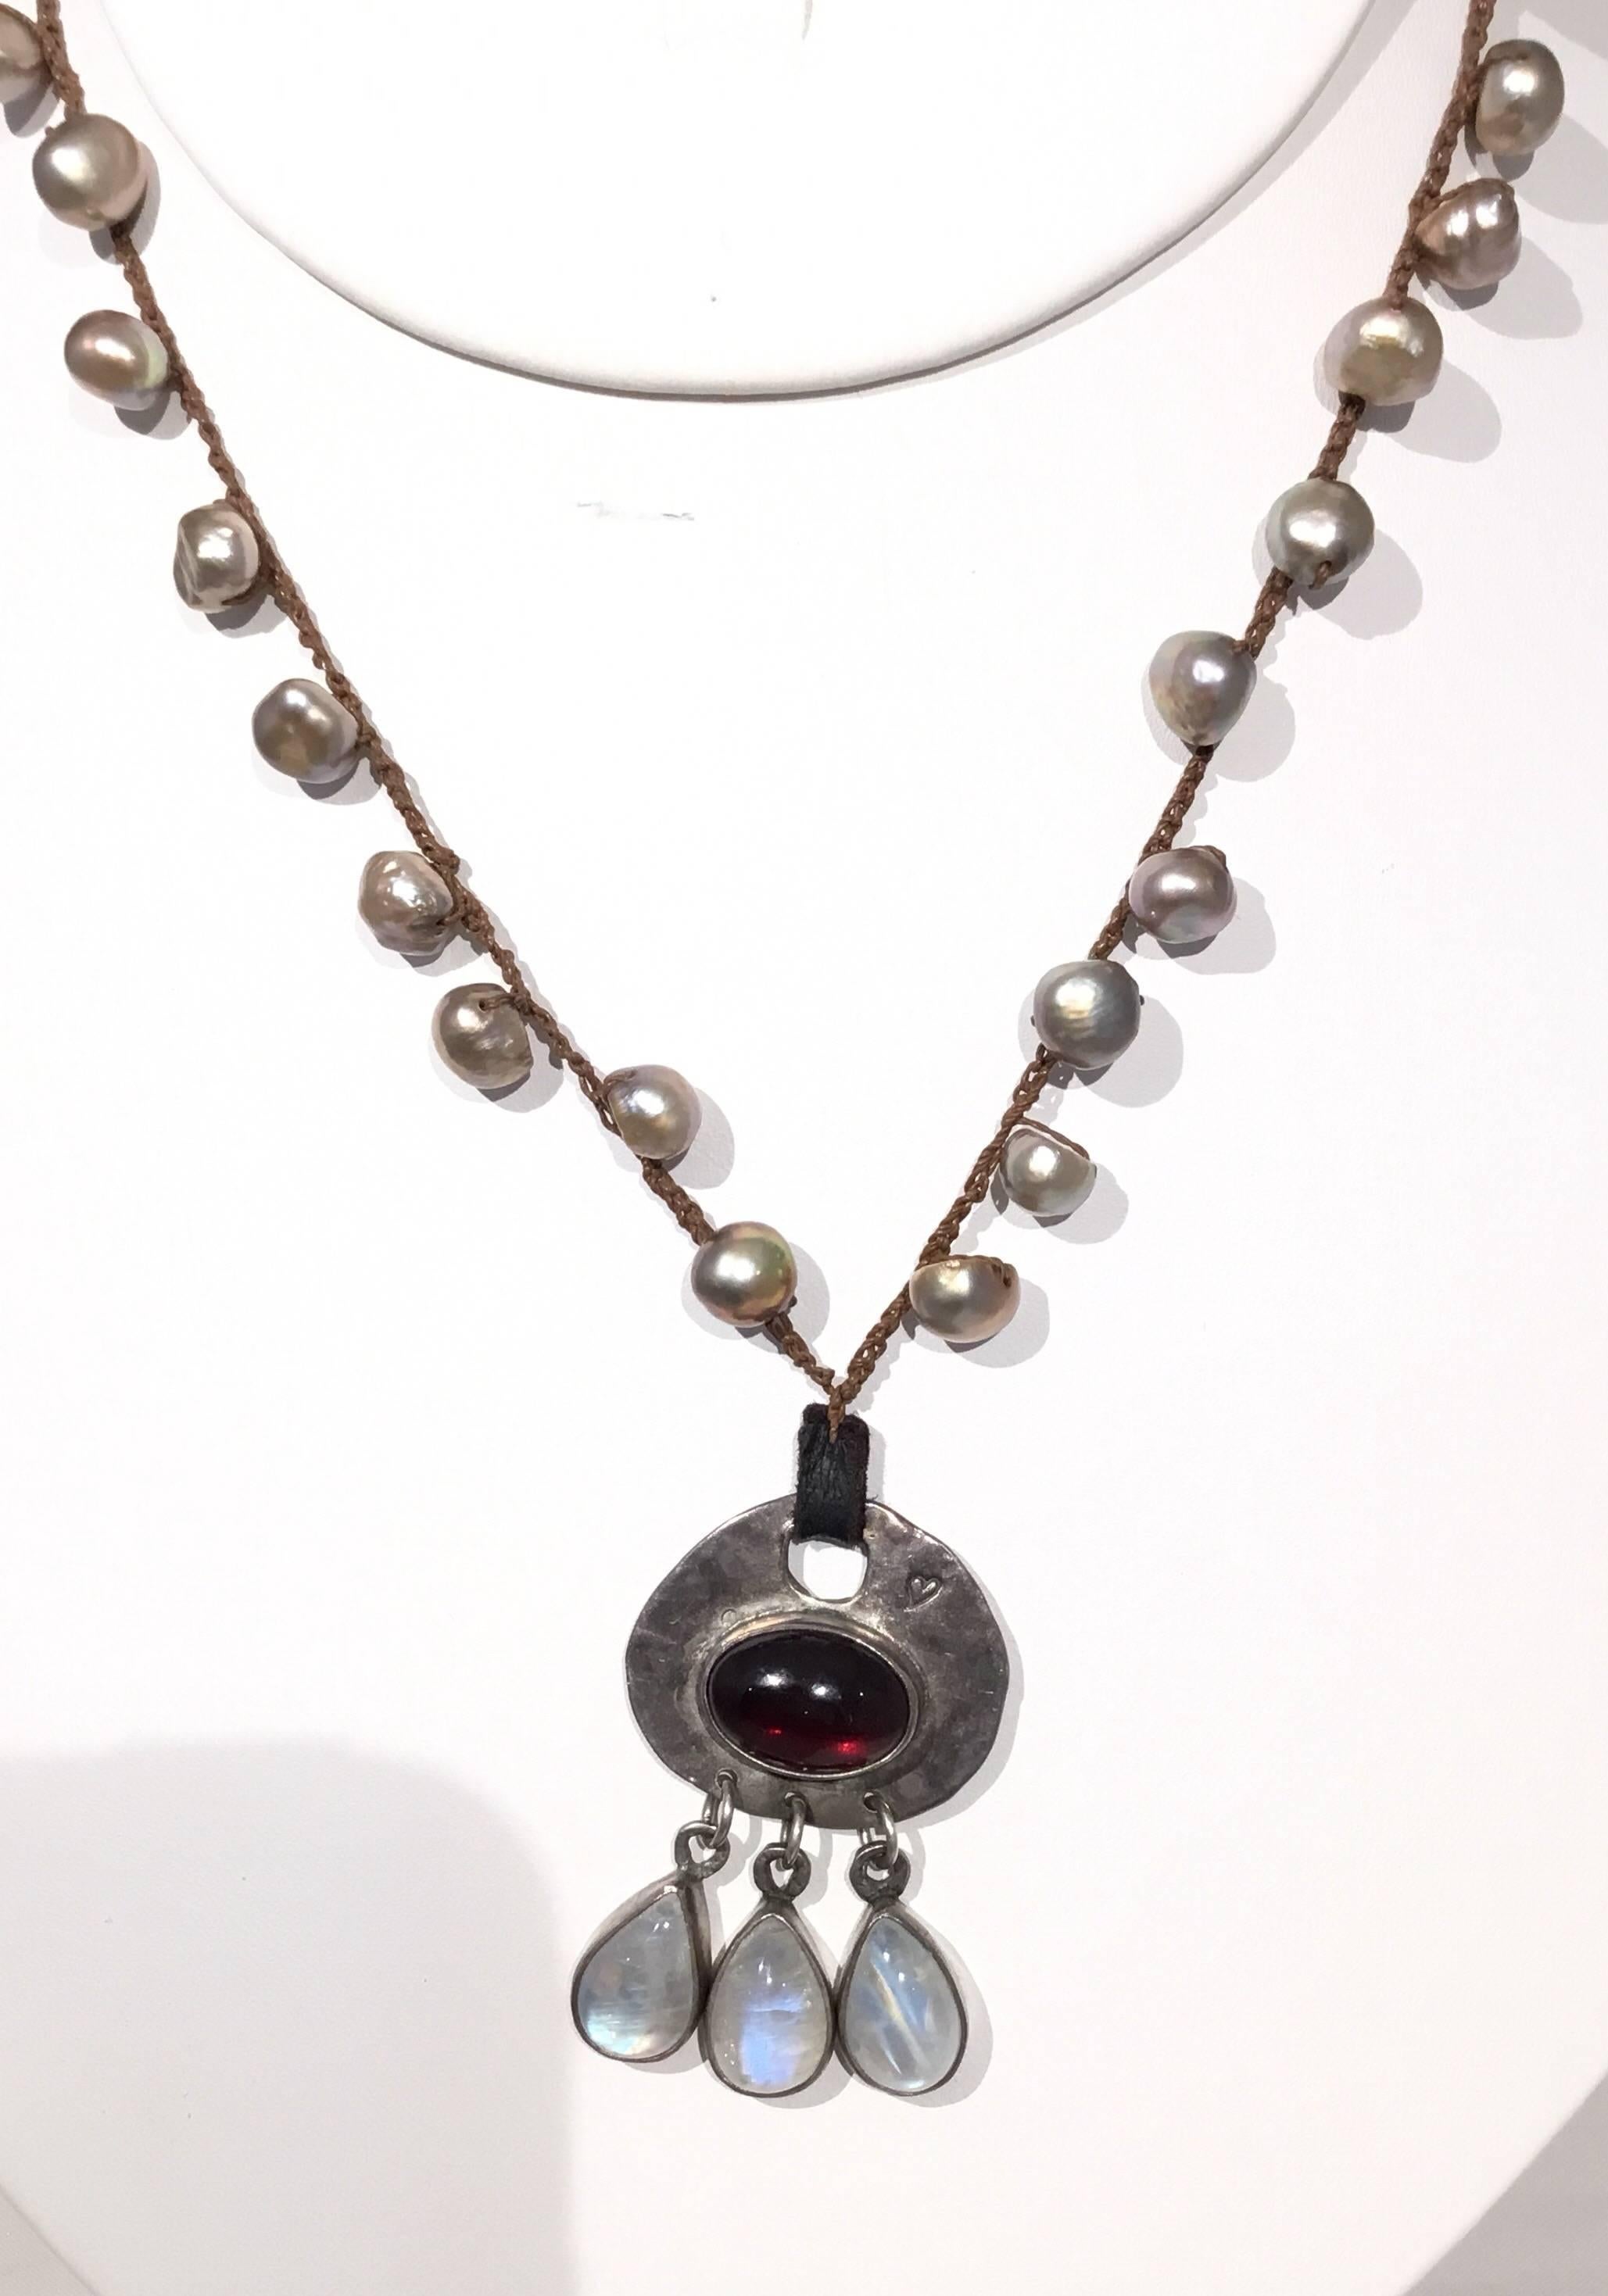 Jes Maharry knotted string necklace with pearls throughout, silver clasp, pendant is sterling silver with a garnet stone at the center and dangling moonstone gems. Approximate length 9 inches drop or 18